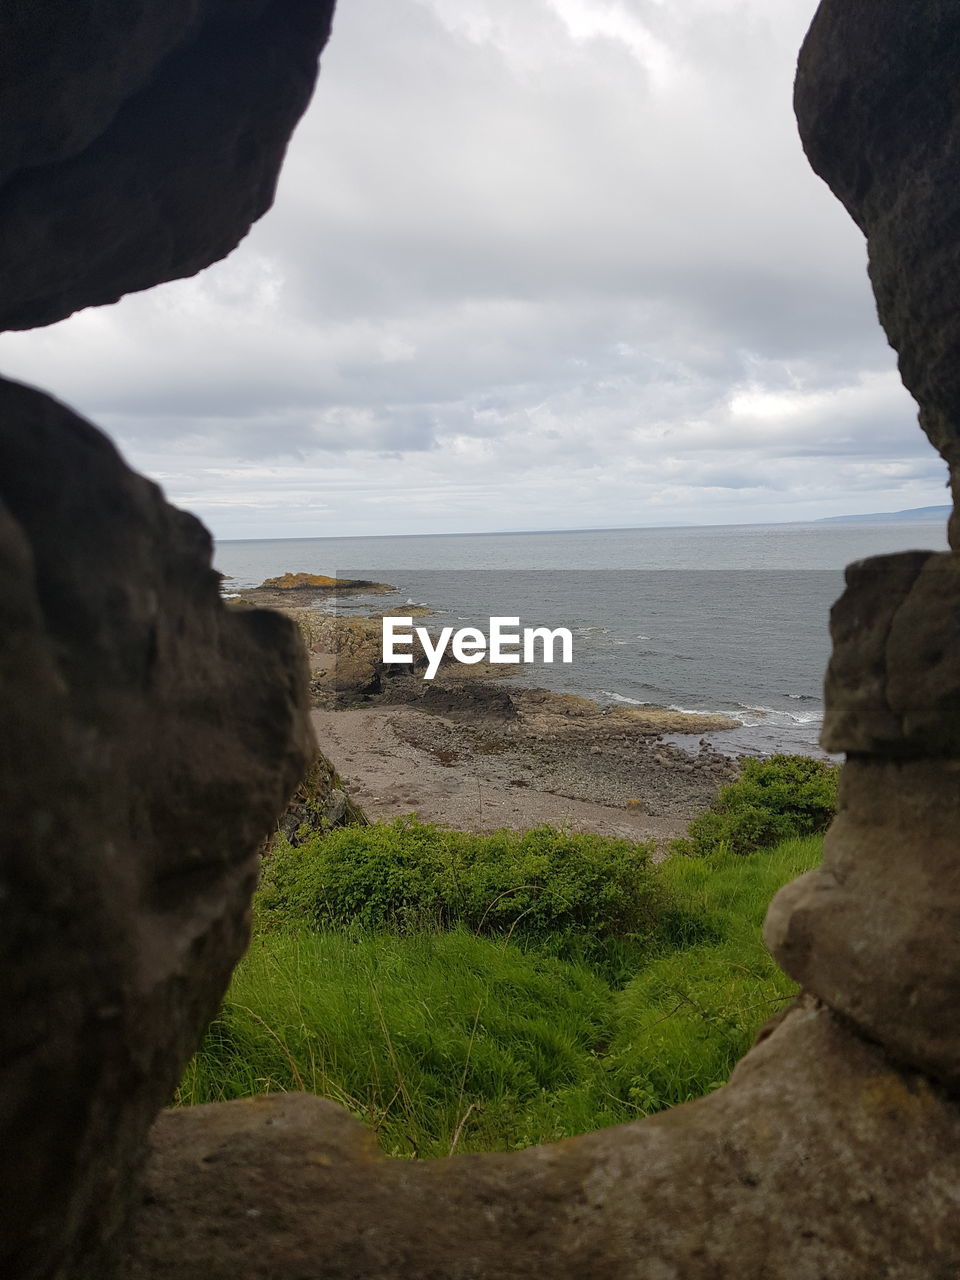 SCENIC VIEW OF SEA AND ROCKS AGAINST SKY